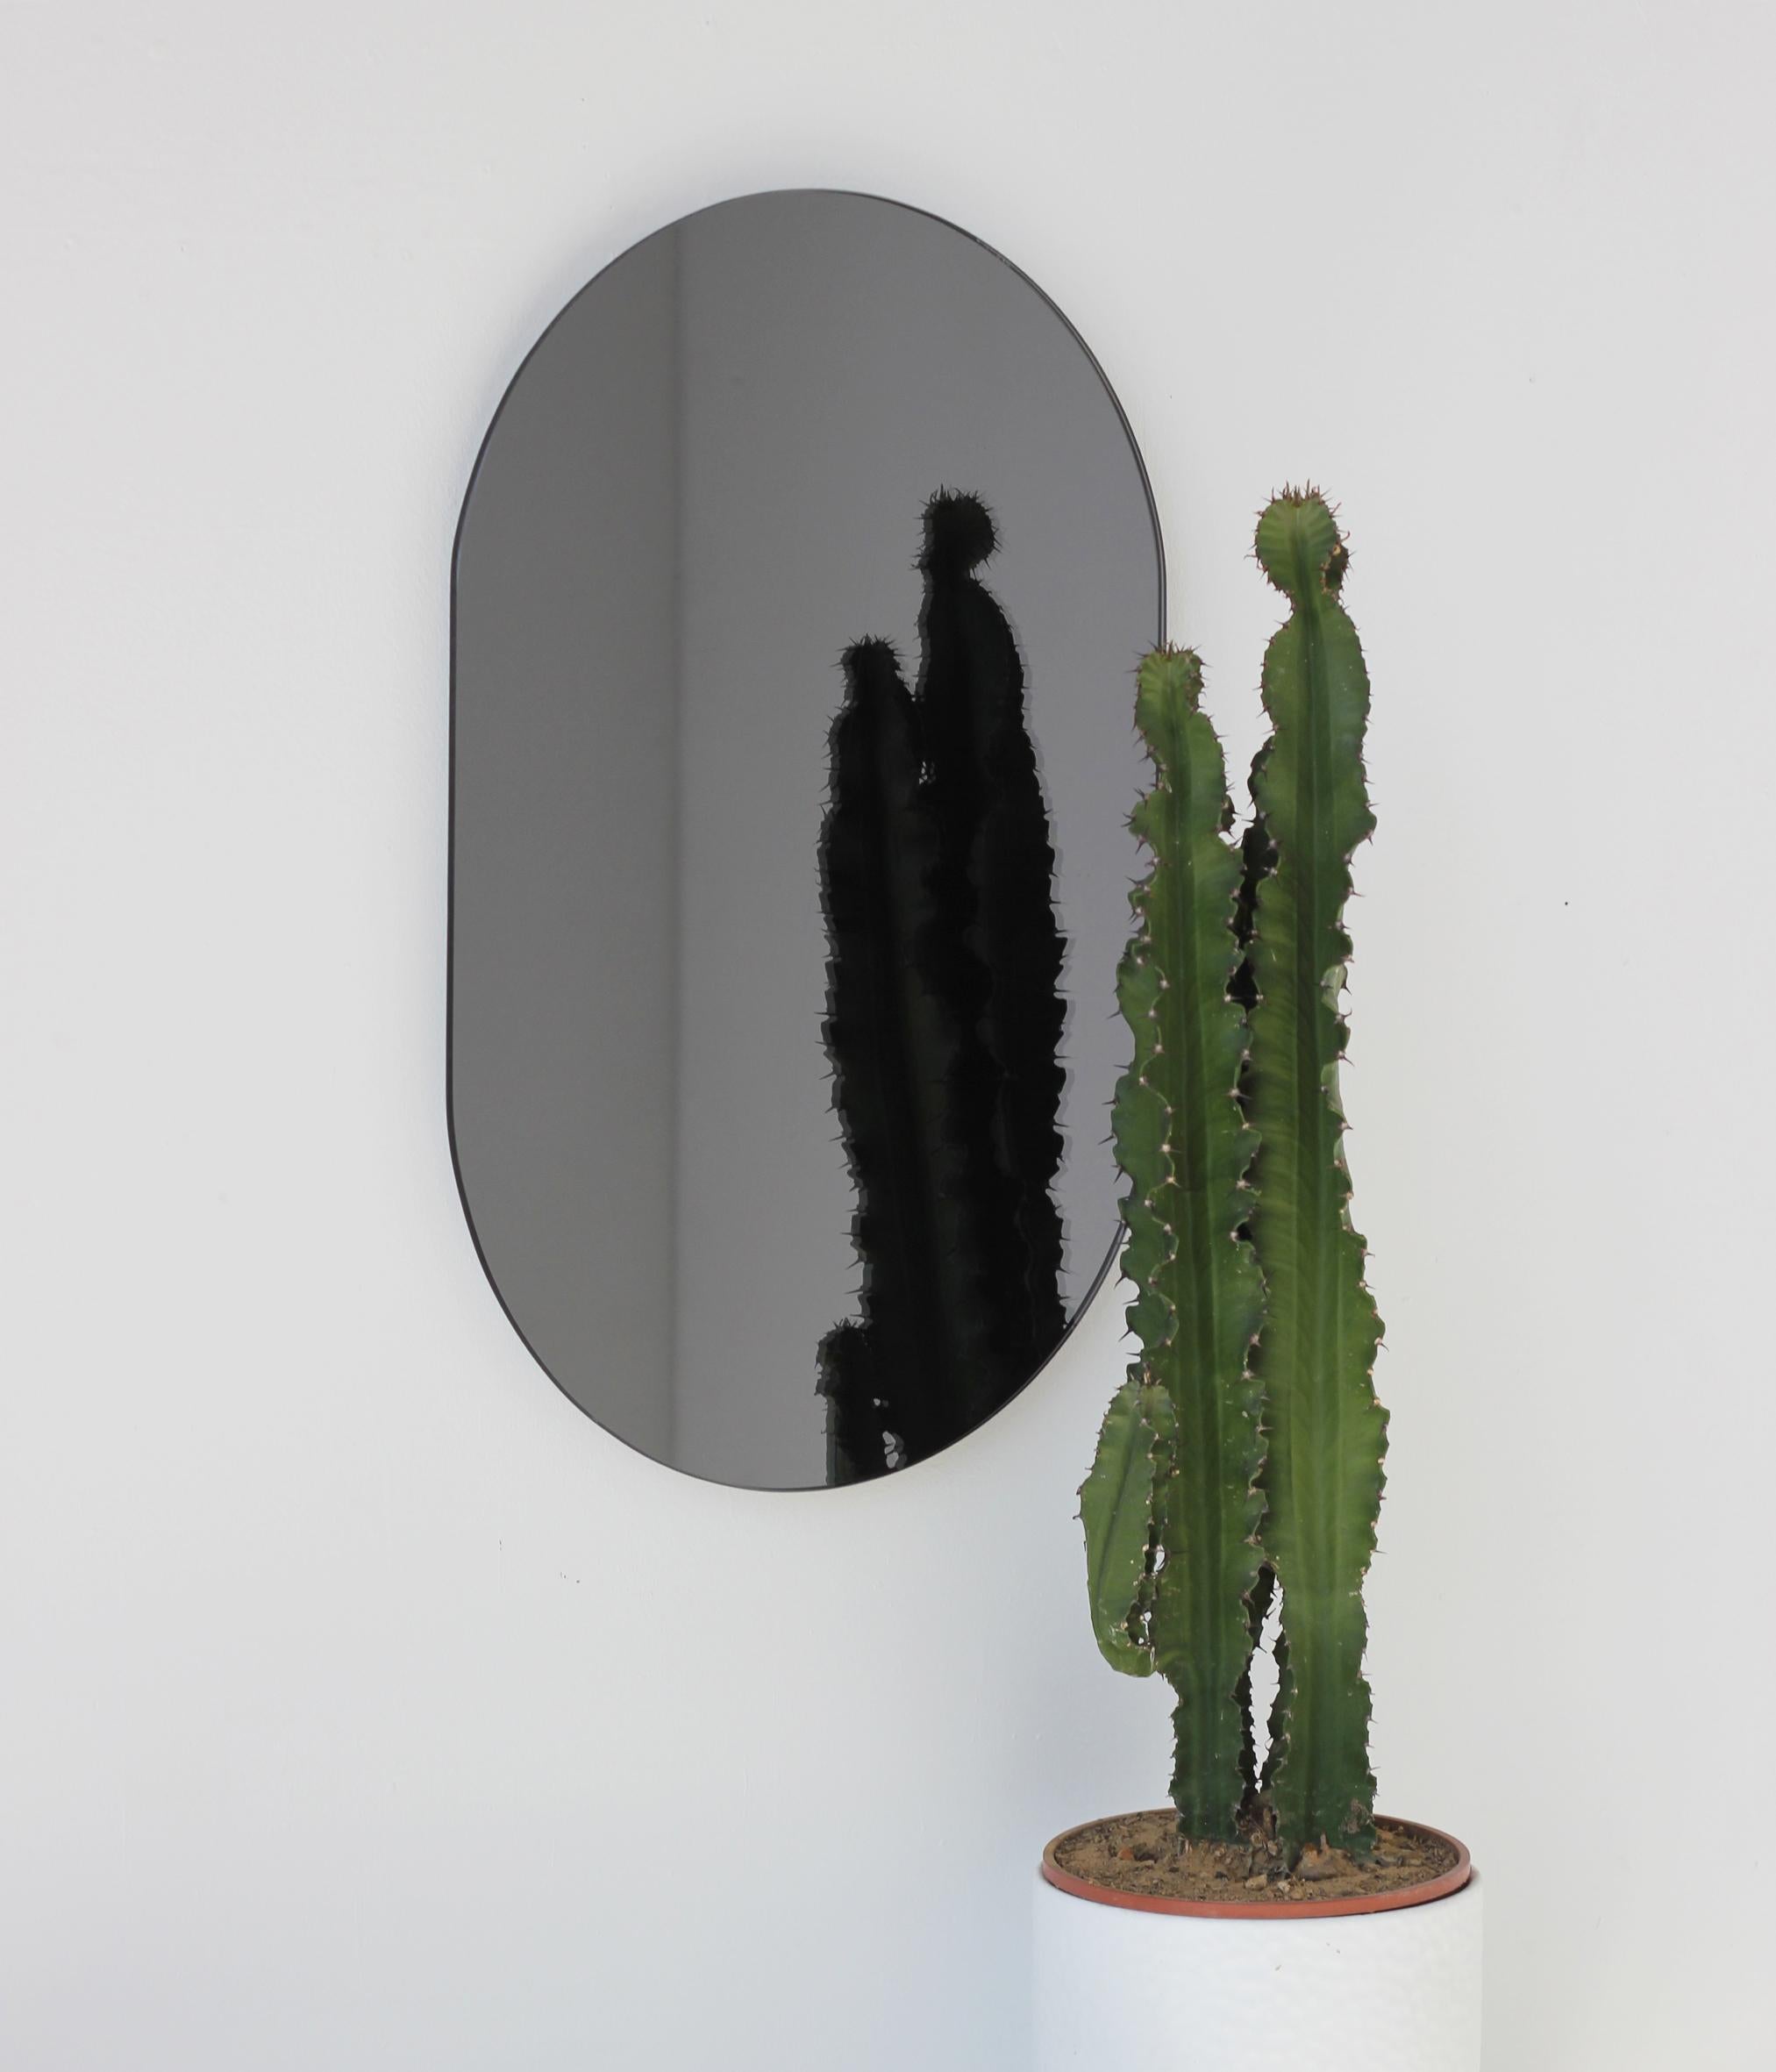 Minimalist Capsula™ capsule / pill shaped black tinted frameless mirror with a floating effect. Quality design that ensures the mirror sits perfectly parallel to the wall. Designed and made in London, UK.

Fitted with professional plates not visible